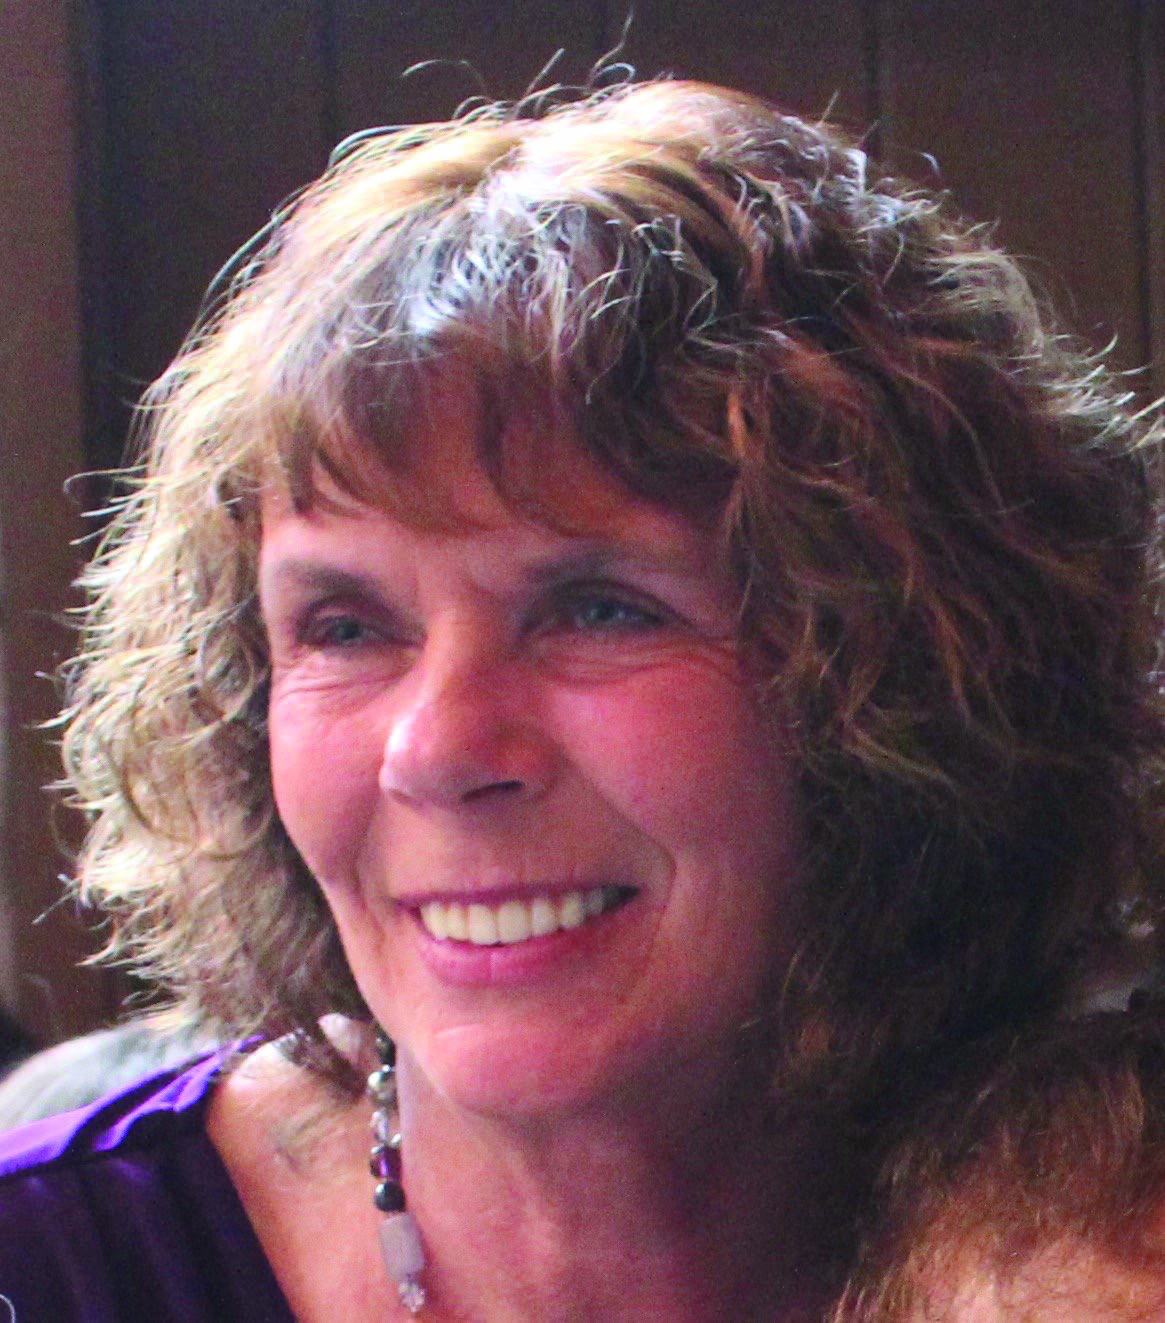 Kelly Cooper in a 2019 photo. (Photo provided)